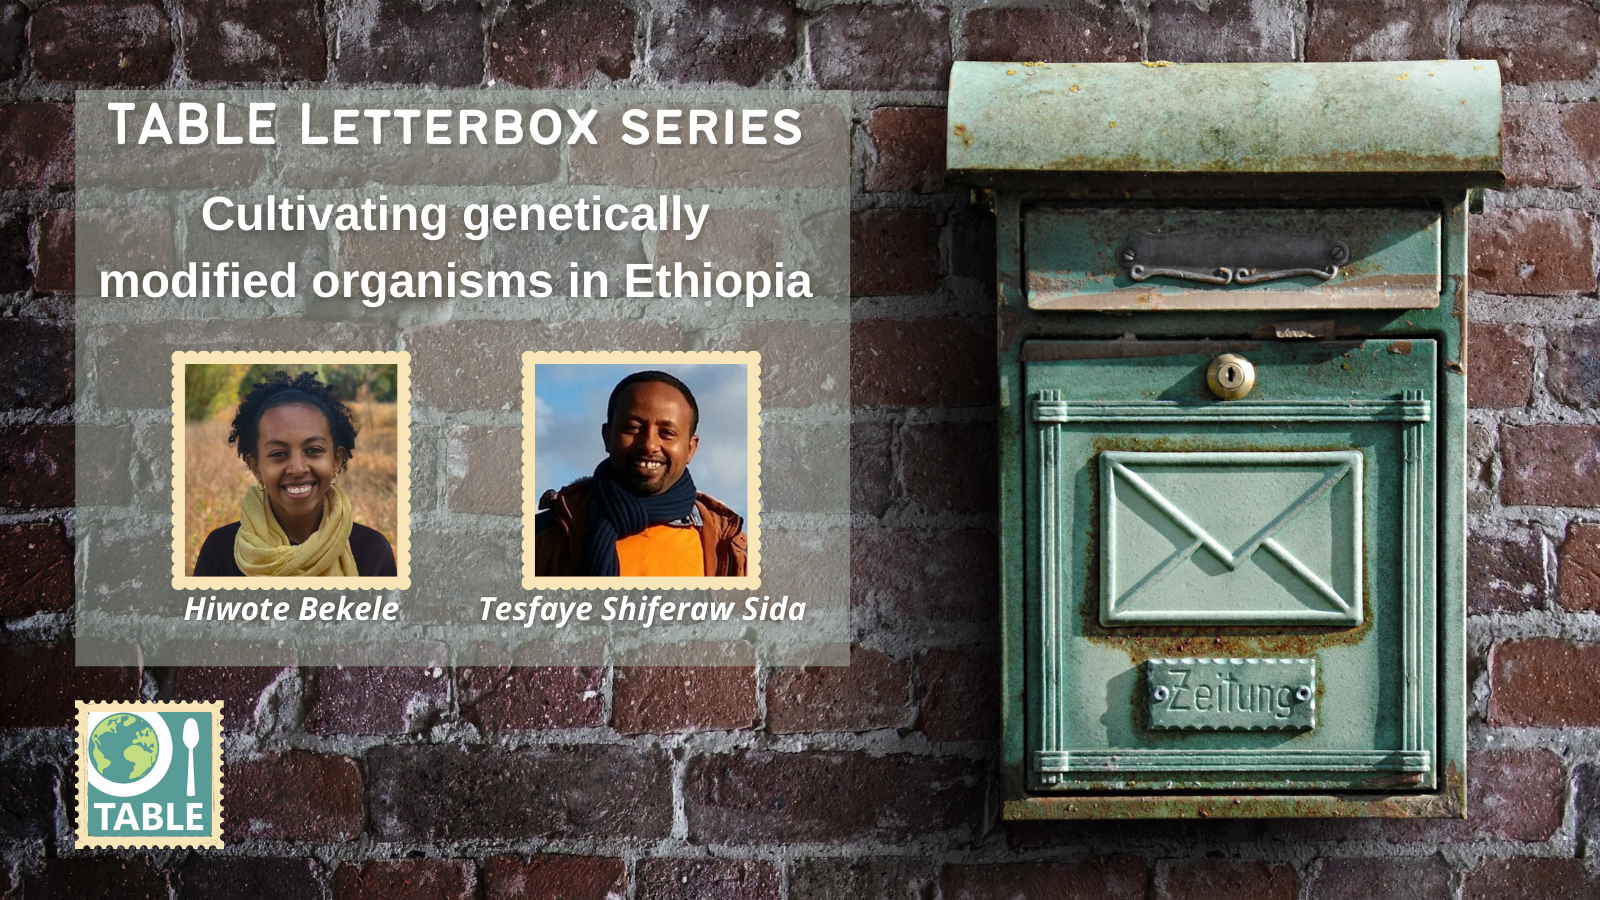 Series 1: Cultivating genetically modified organisms in Ethiopia with Hiwote Bekele and Tesfaye Shiferaw Sida (PhD)